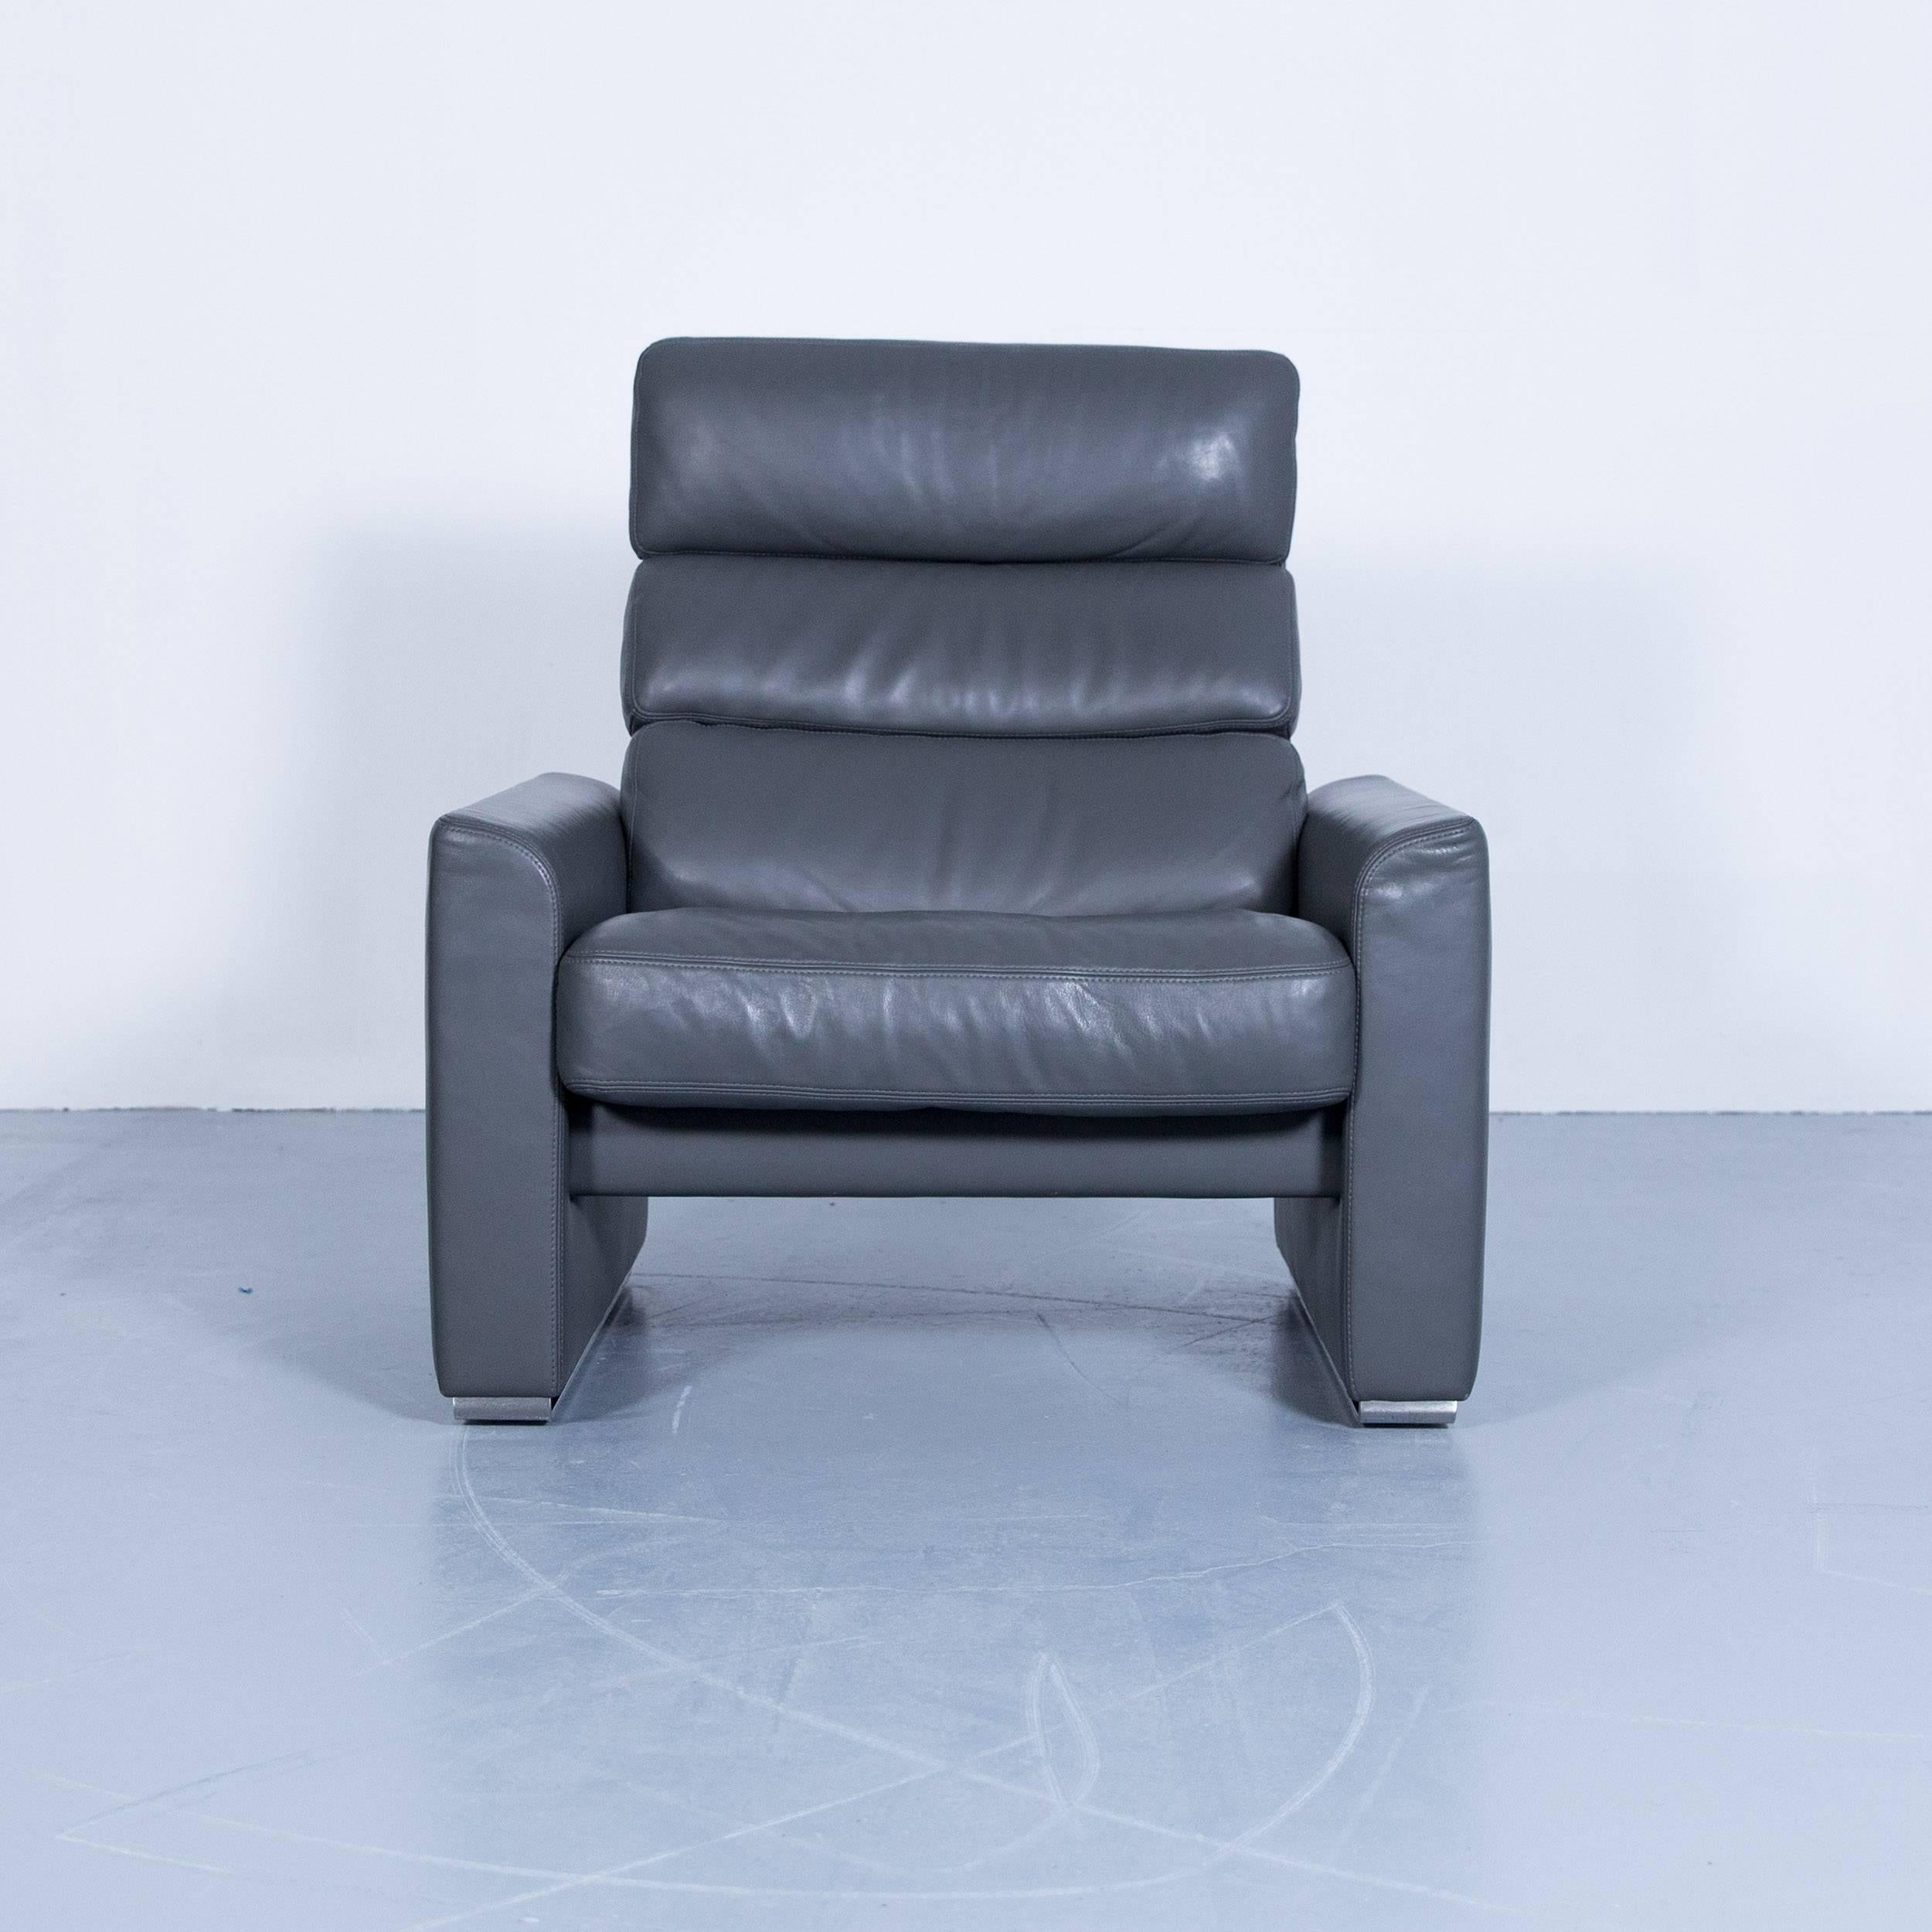 Erpo Soho designer armchair leather grey anthracite one seat modern function, in a minimalistic and modern design, made for pure comfort.